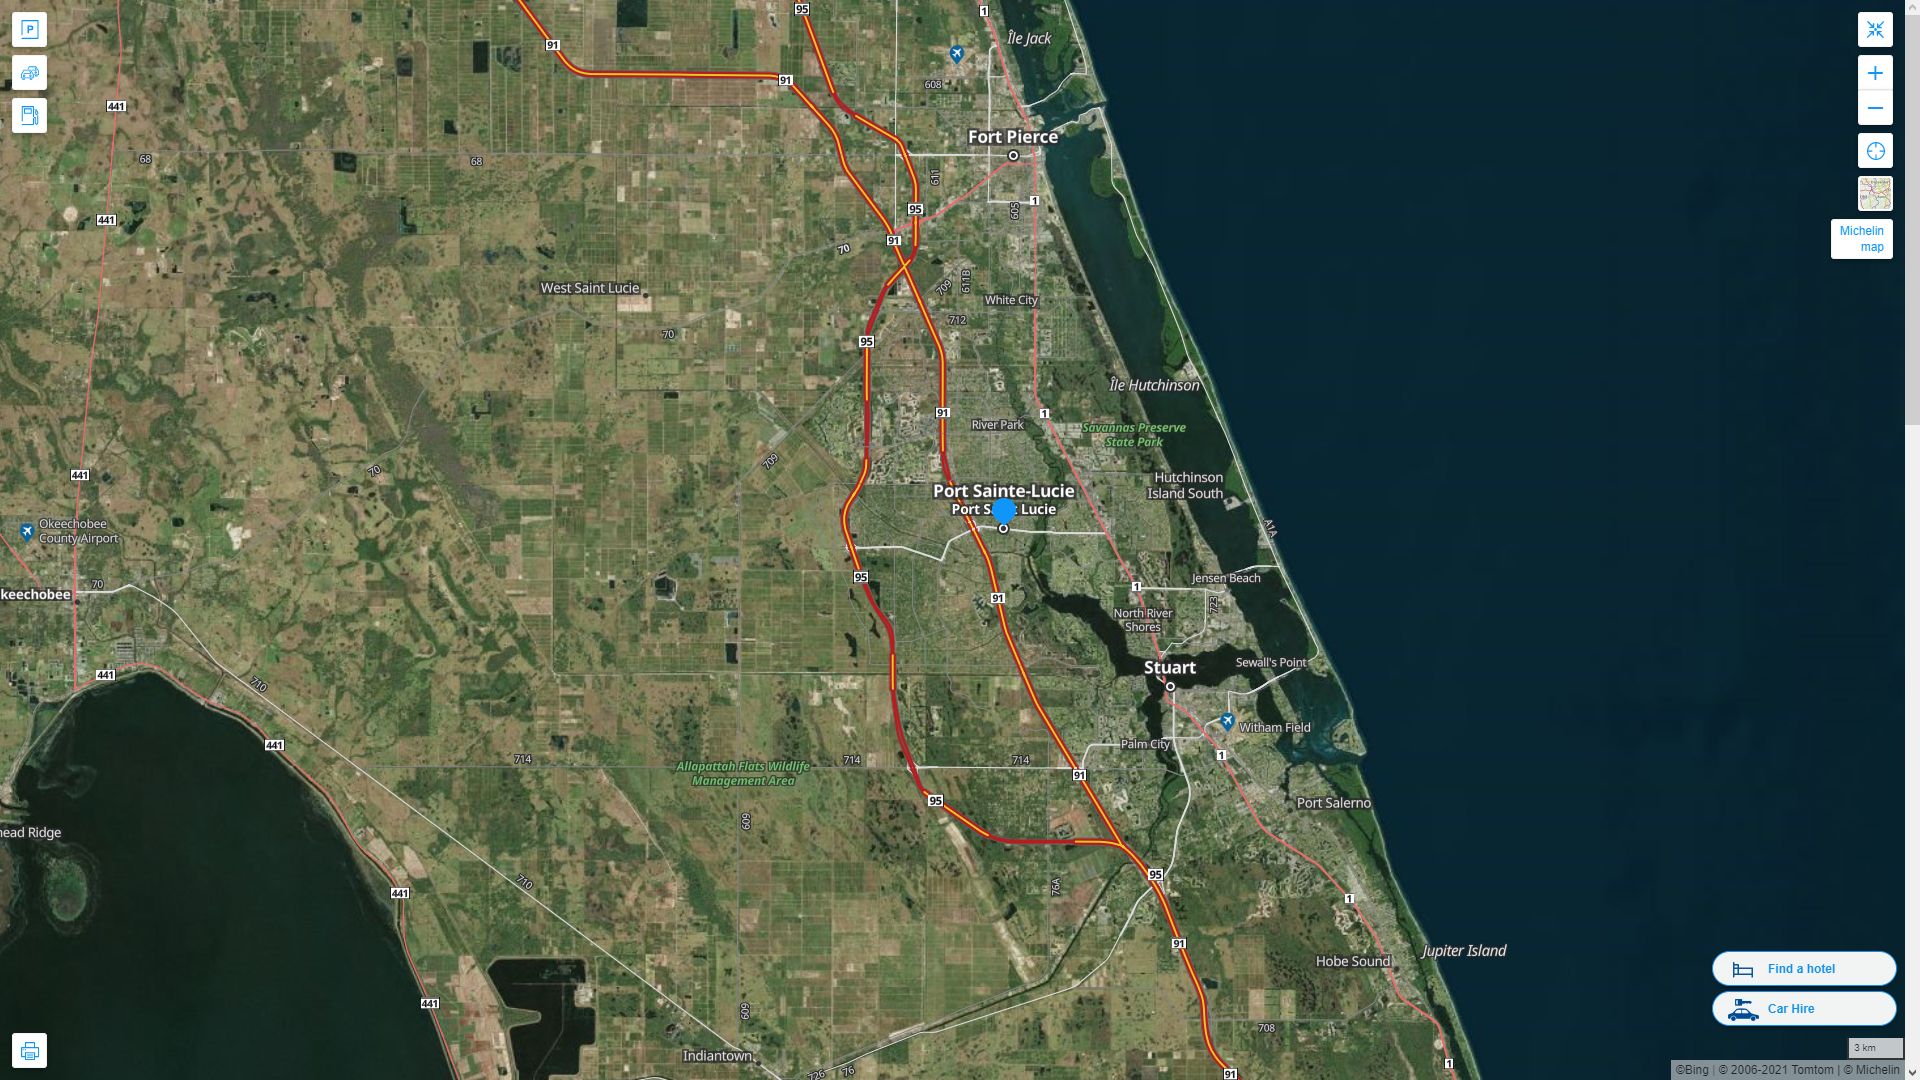 Port St. Lucie Florida Highway and Road Map with Satellite View